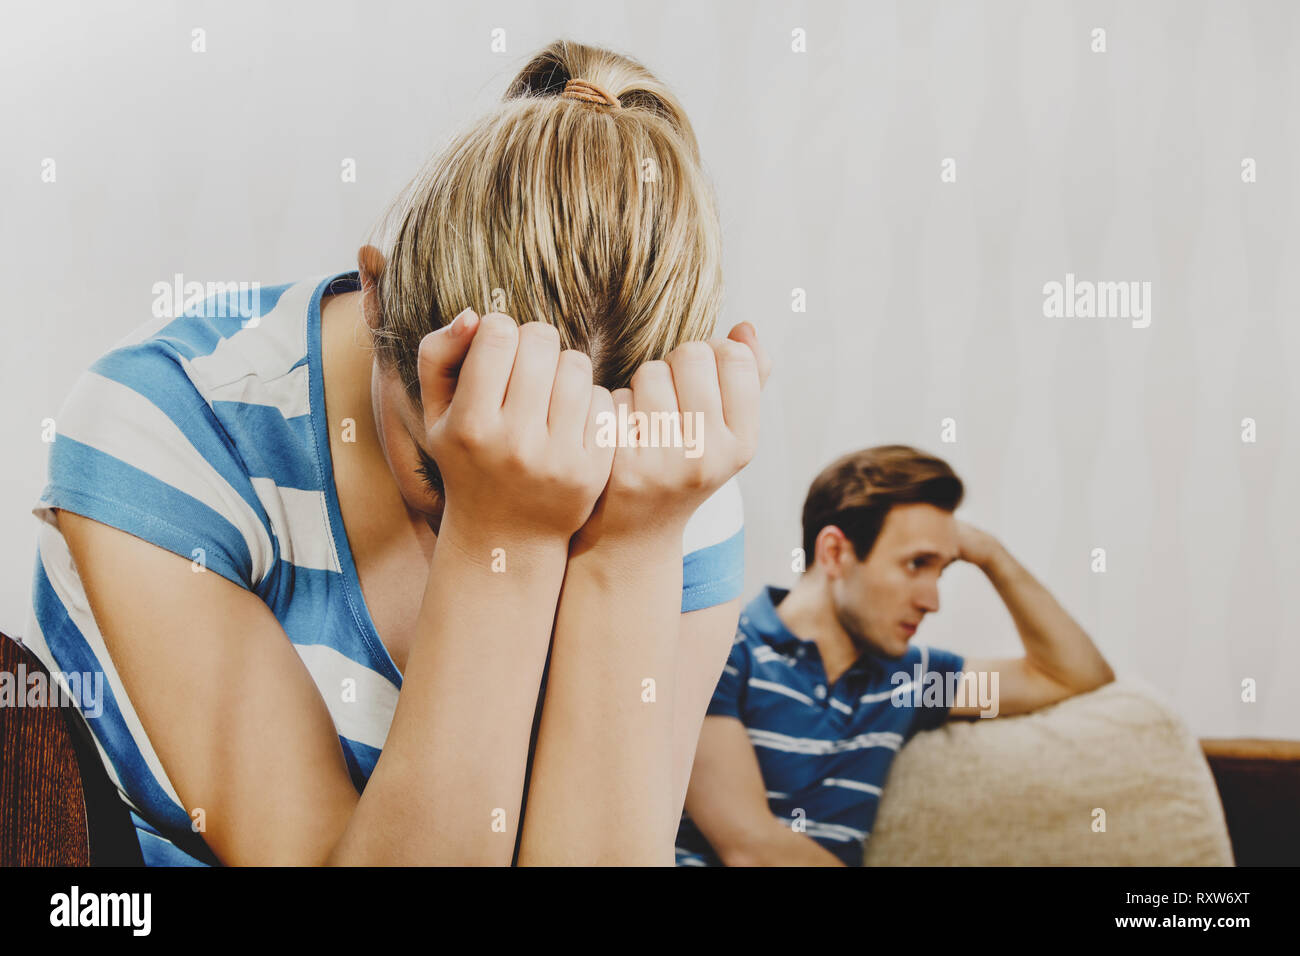 Couple after quarrel. Woman is crying and man takes offense. Stock Photo